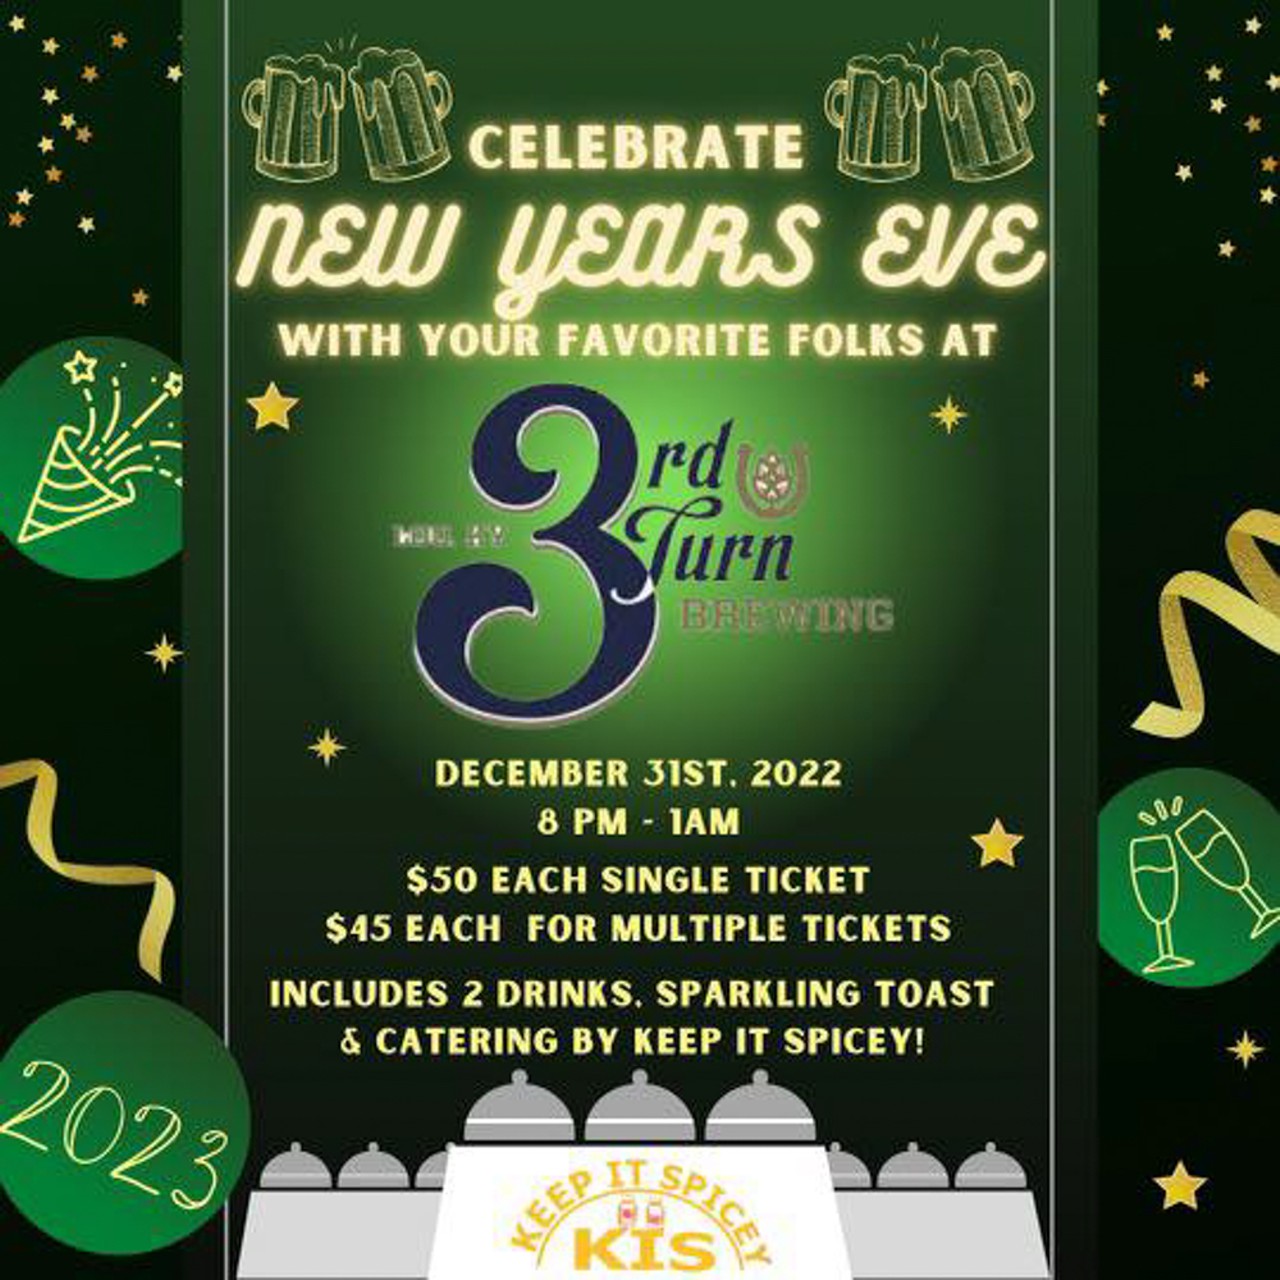  New Year&#146;s @ 3rd Turn 
3rd Turn Brewing, 10408 Watterson Trail 
8 p.m. - 1 a.m.
$50 single tickets, $45 each for multiple tickets
Toast the new year with two drinks and a midnight bubbly toast, as well as hors d&#146;ouevres by Keep it Spicey.
Art via facebook.com/3rdTurnBrewing